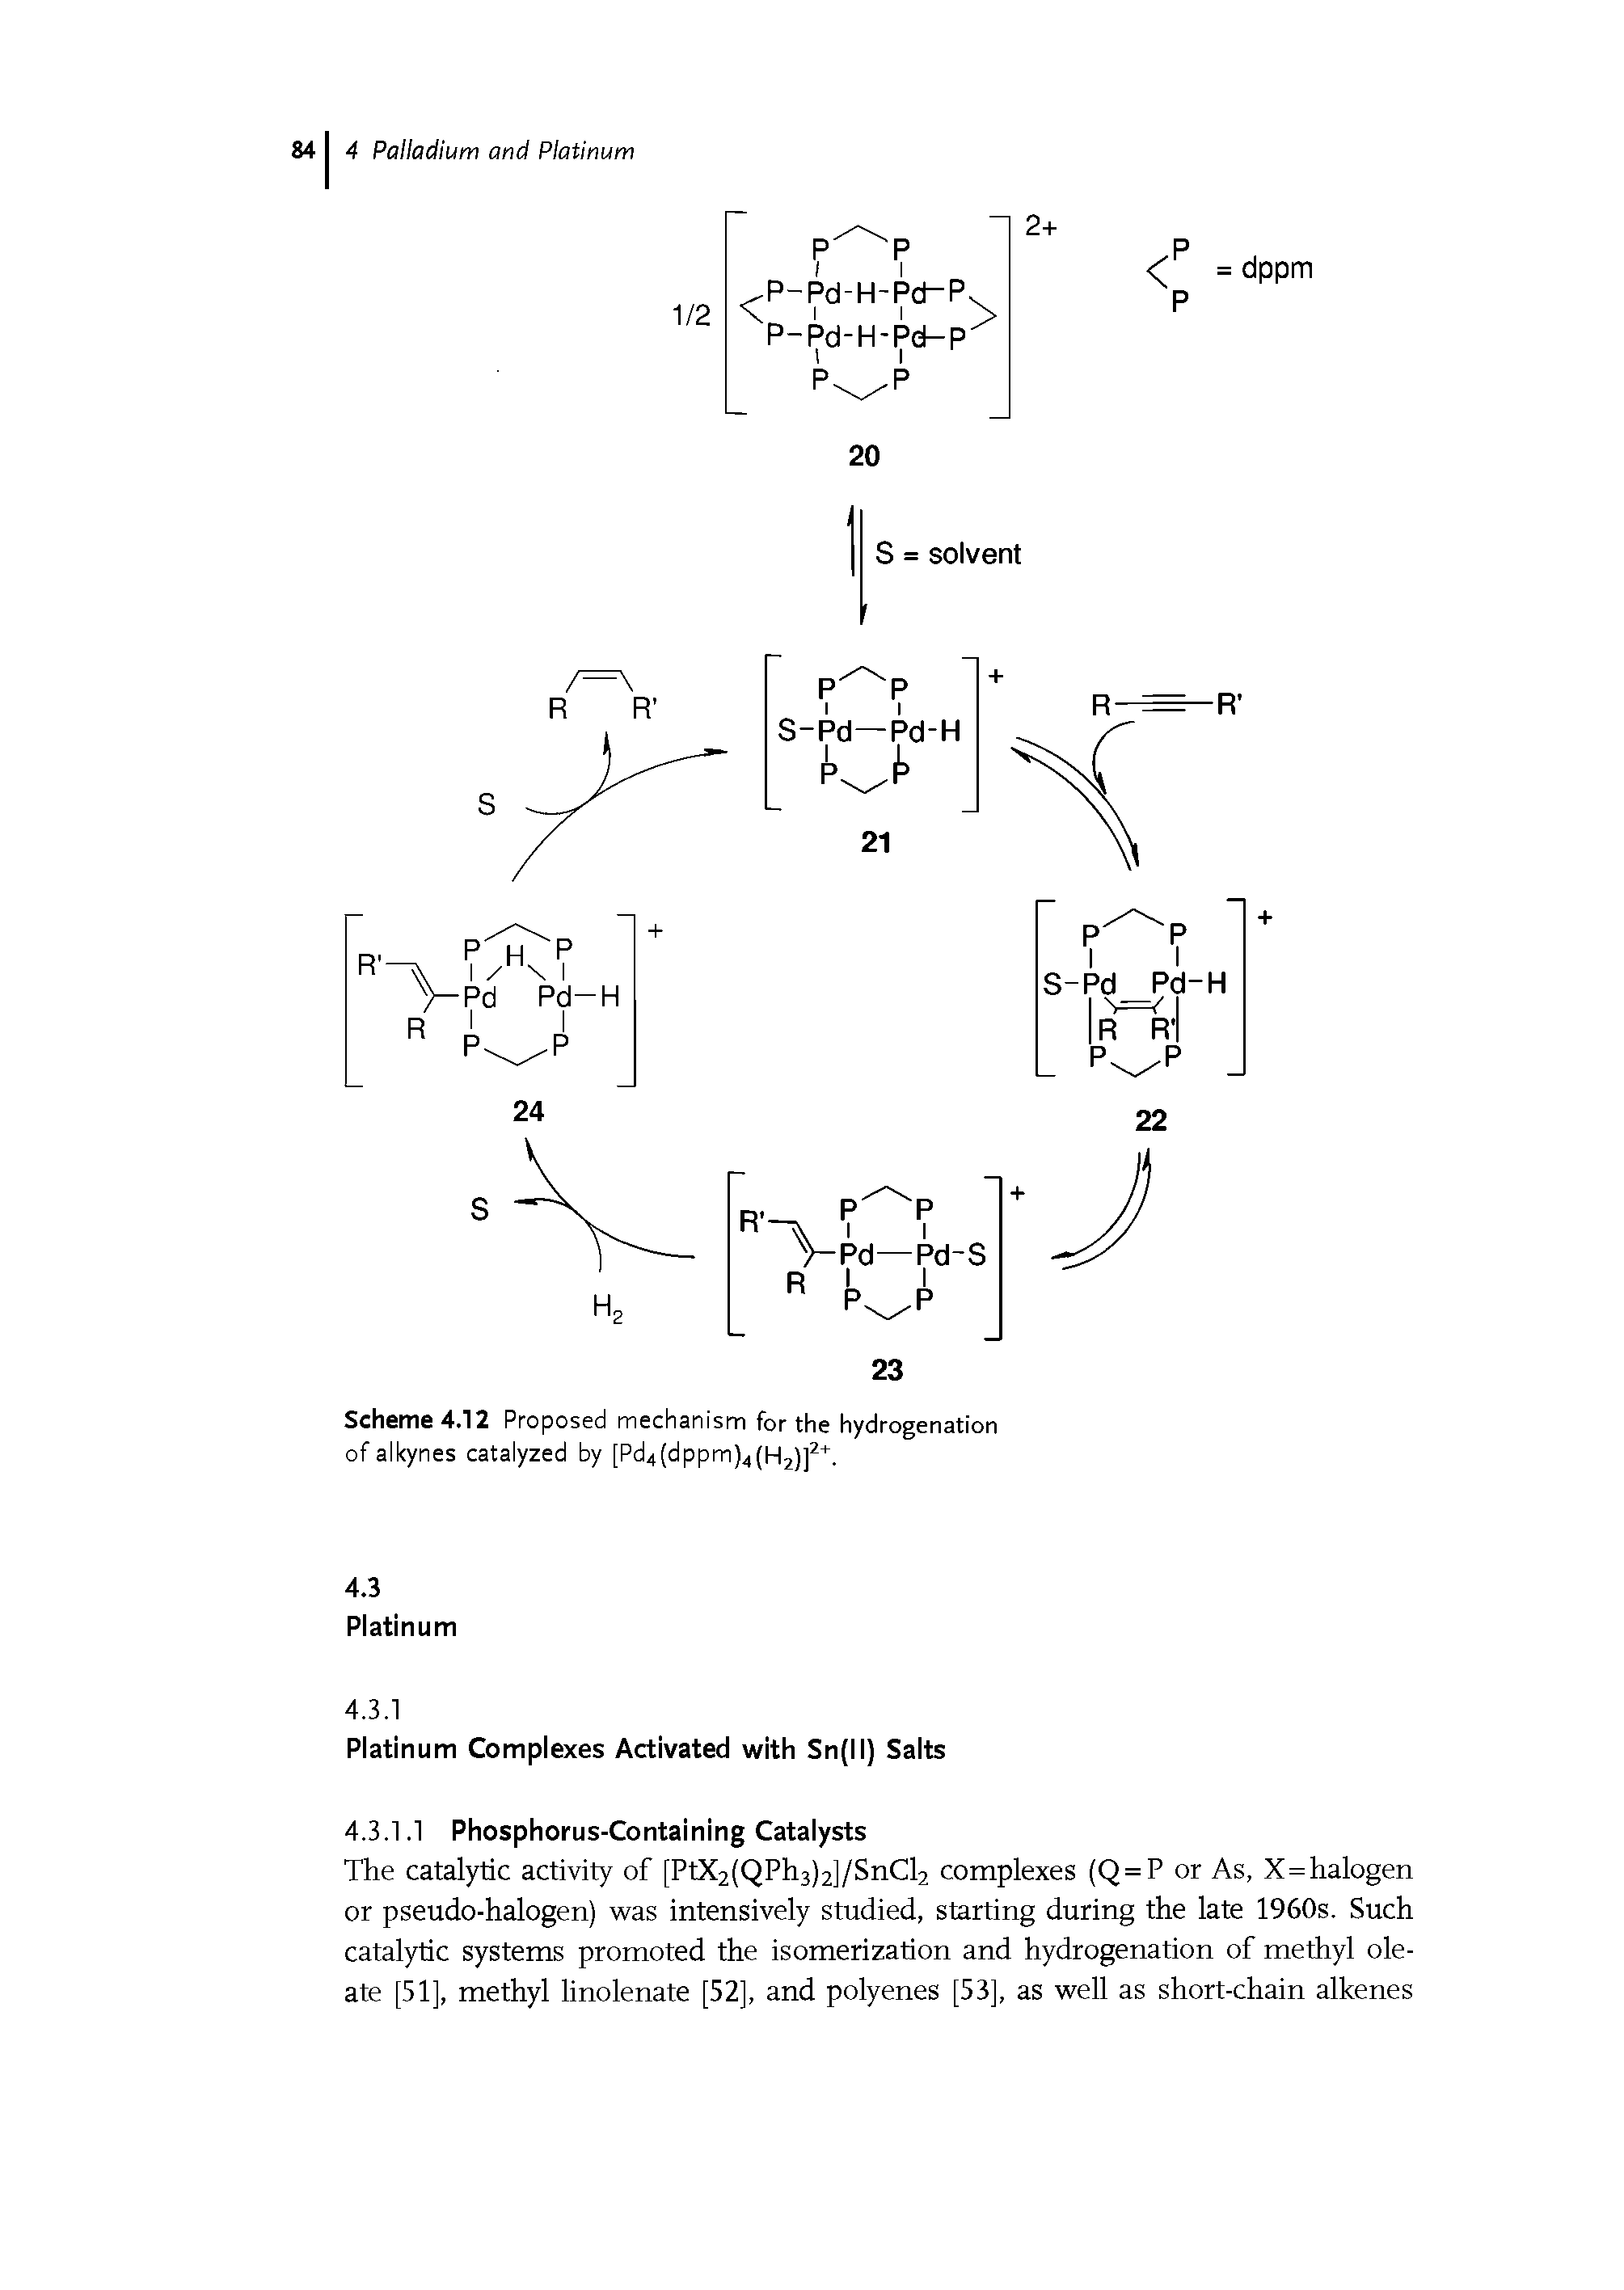 Scheme 4.12 Proposed mechanism for the hydrogenation of alkynes catalyzed by [Pd4(dppm)4(H2)]2+.